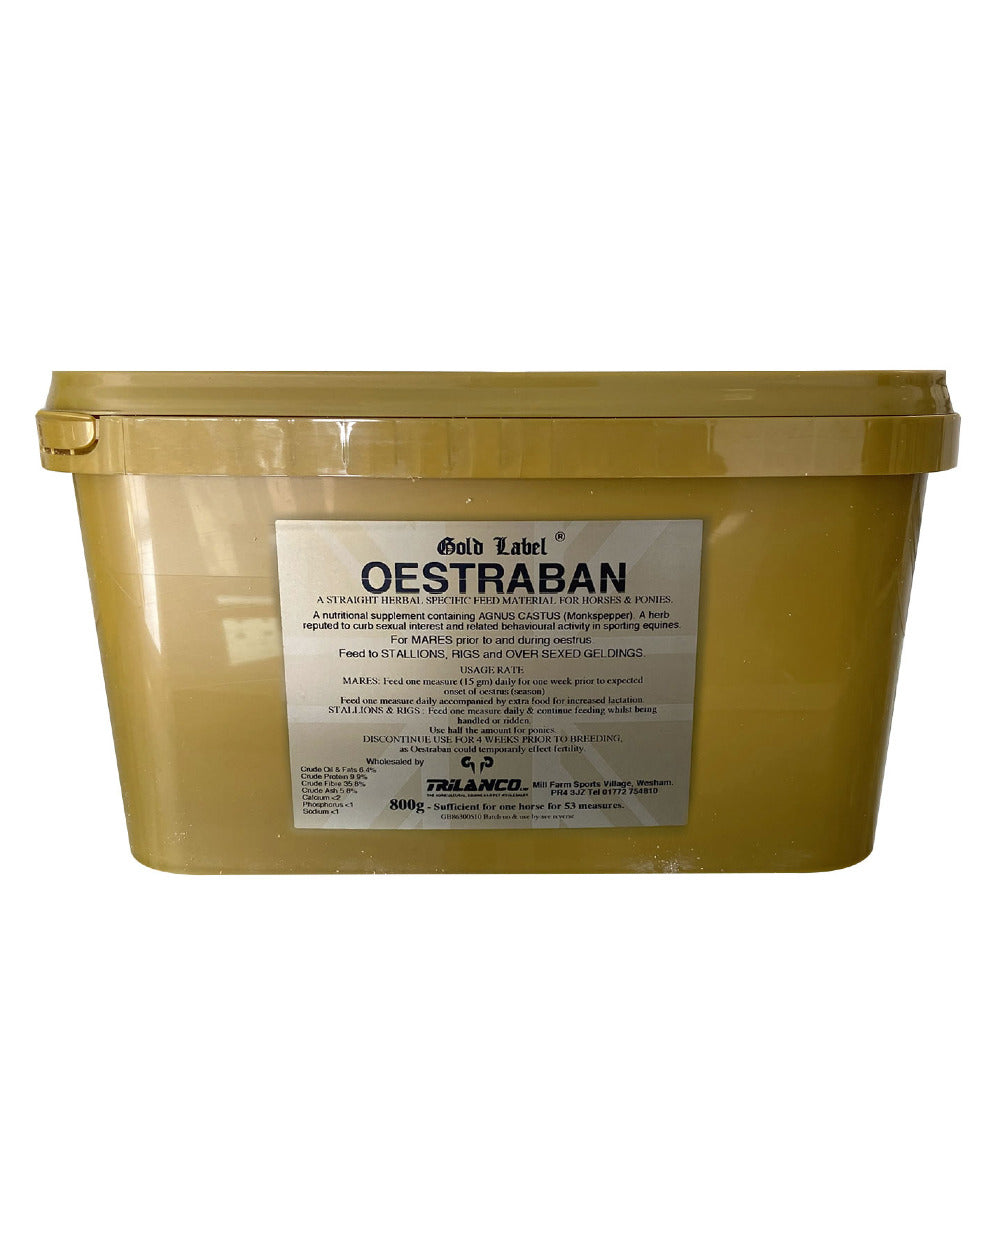 Gold Label Oestraban On A White Background